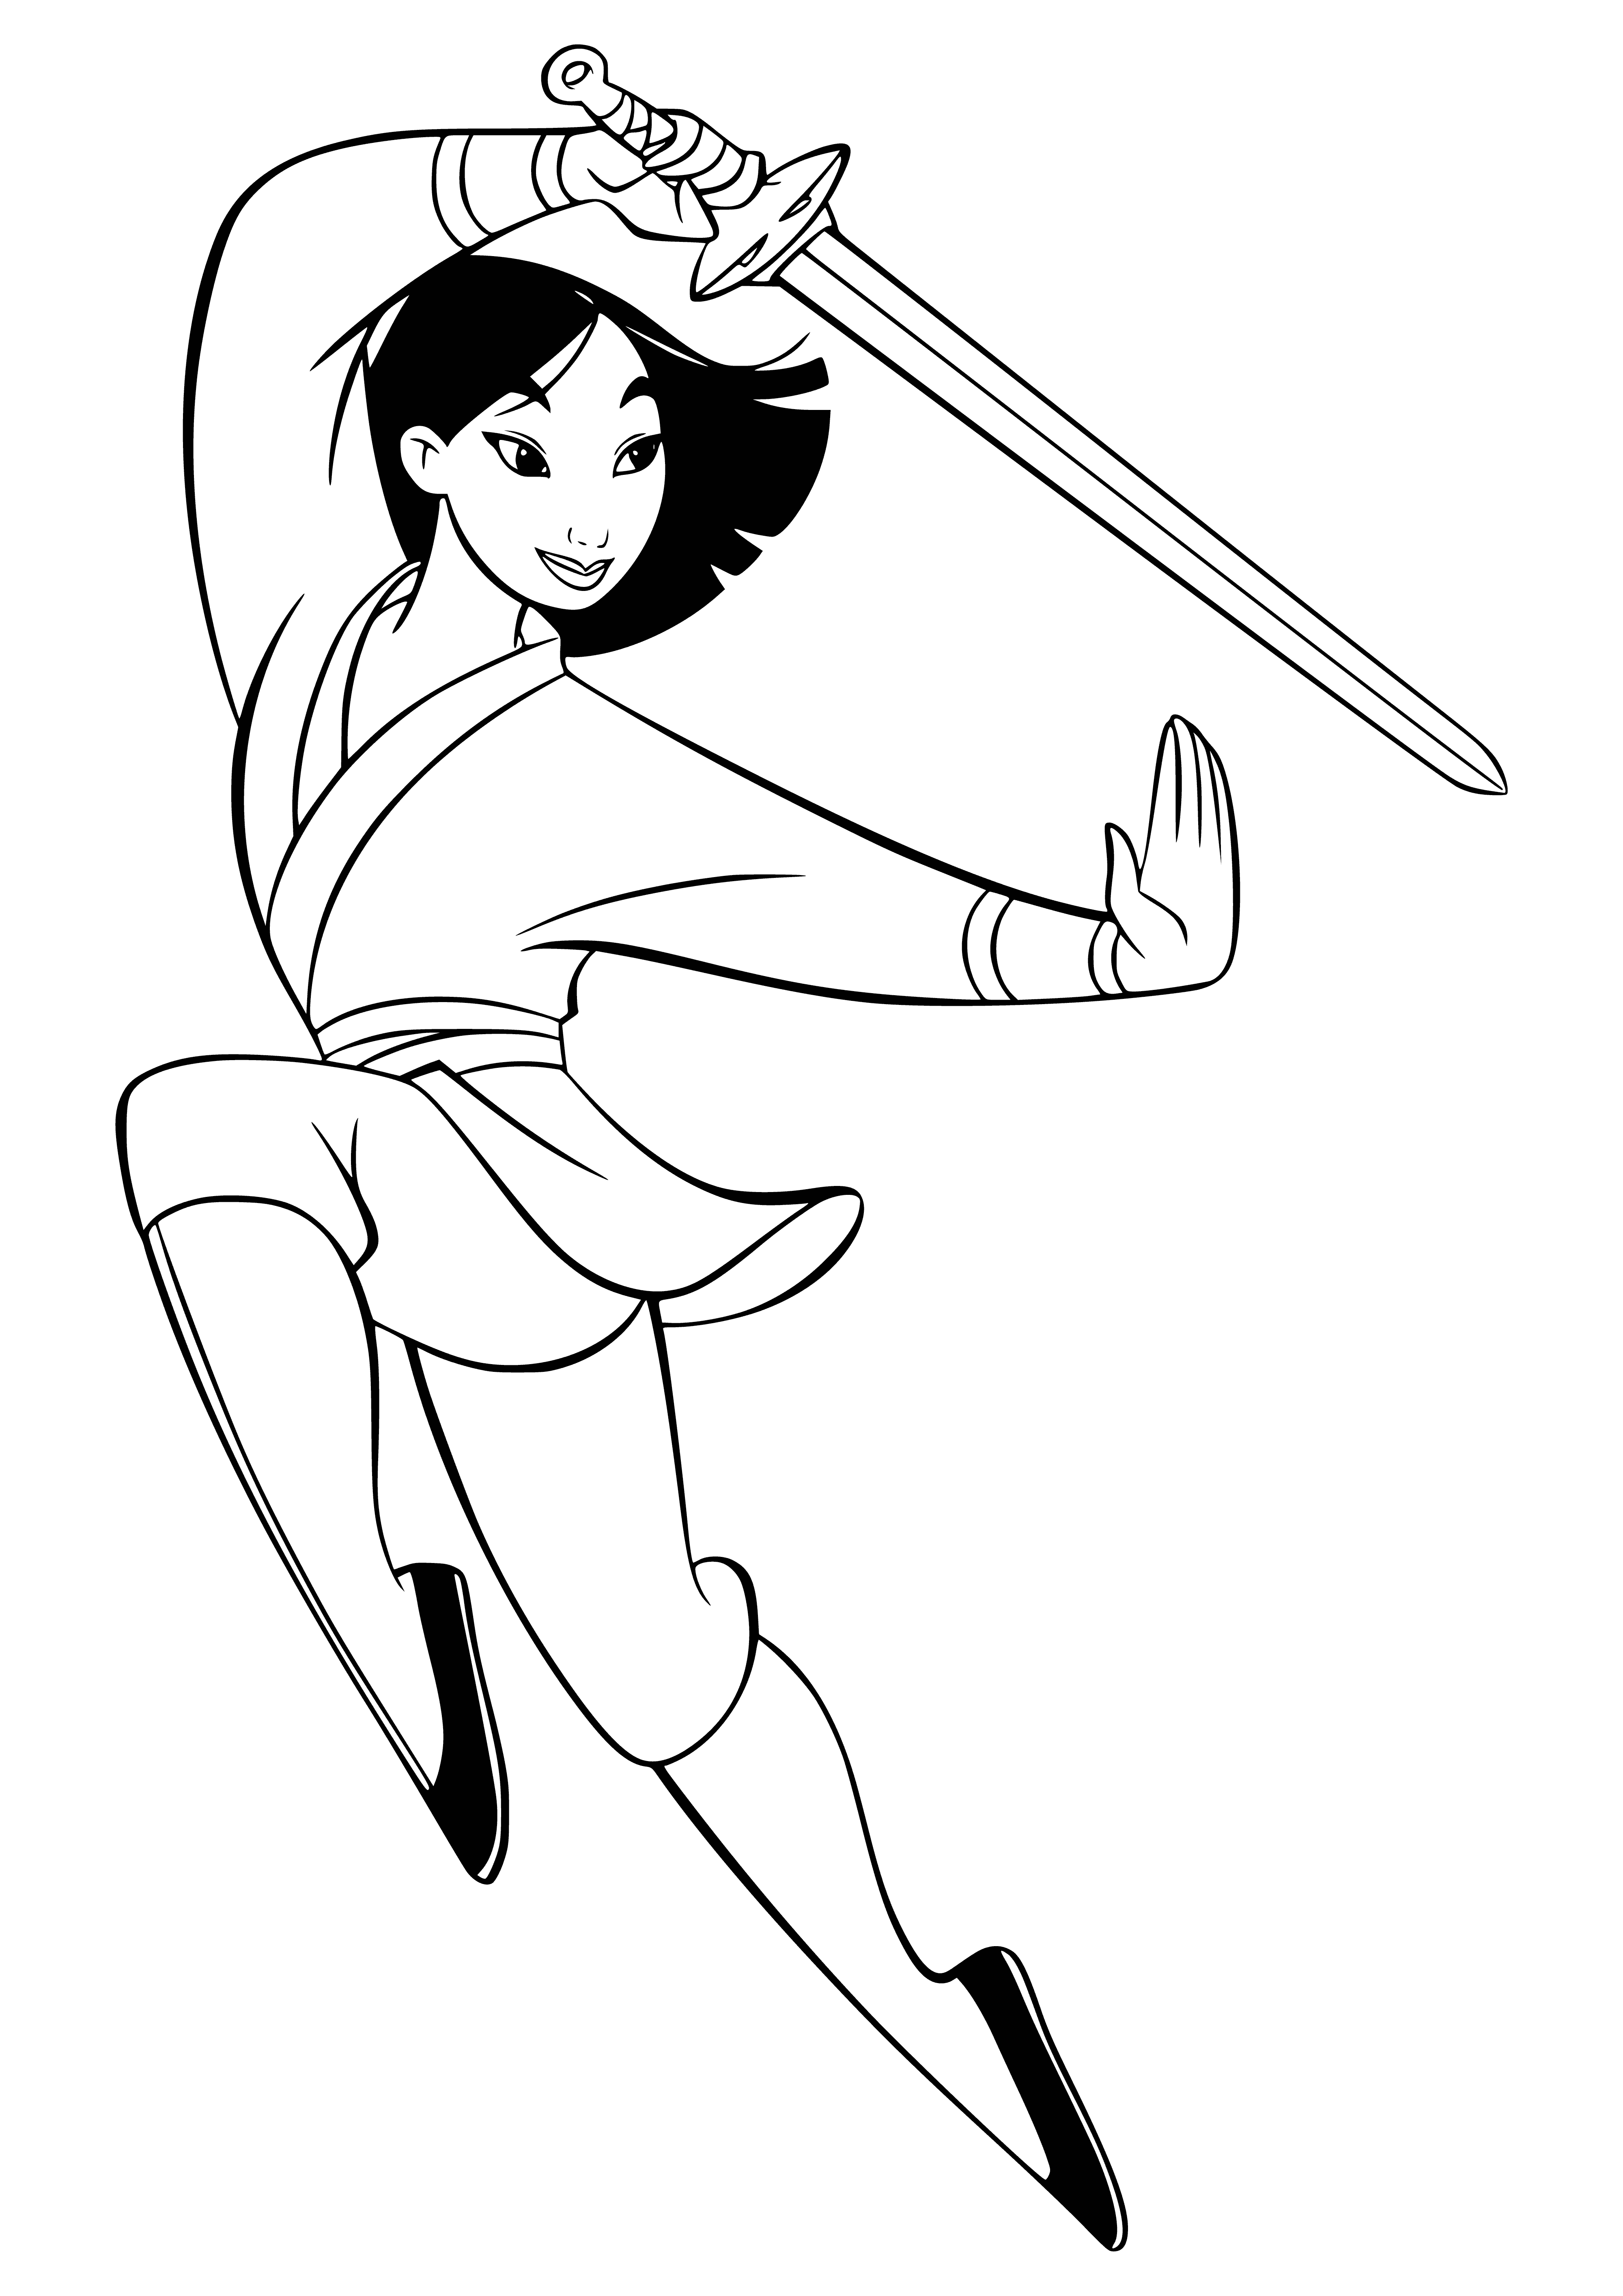 coloring page: Woman in a green dress w/ yellow sash stands in grassy area, wielding a sword. Hair pulled back in a ponytail.